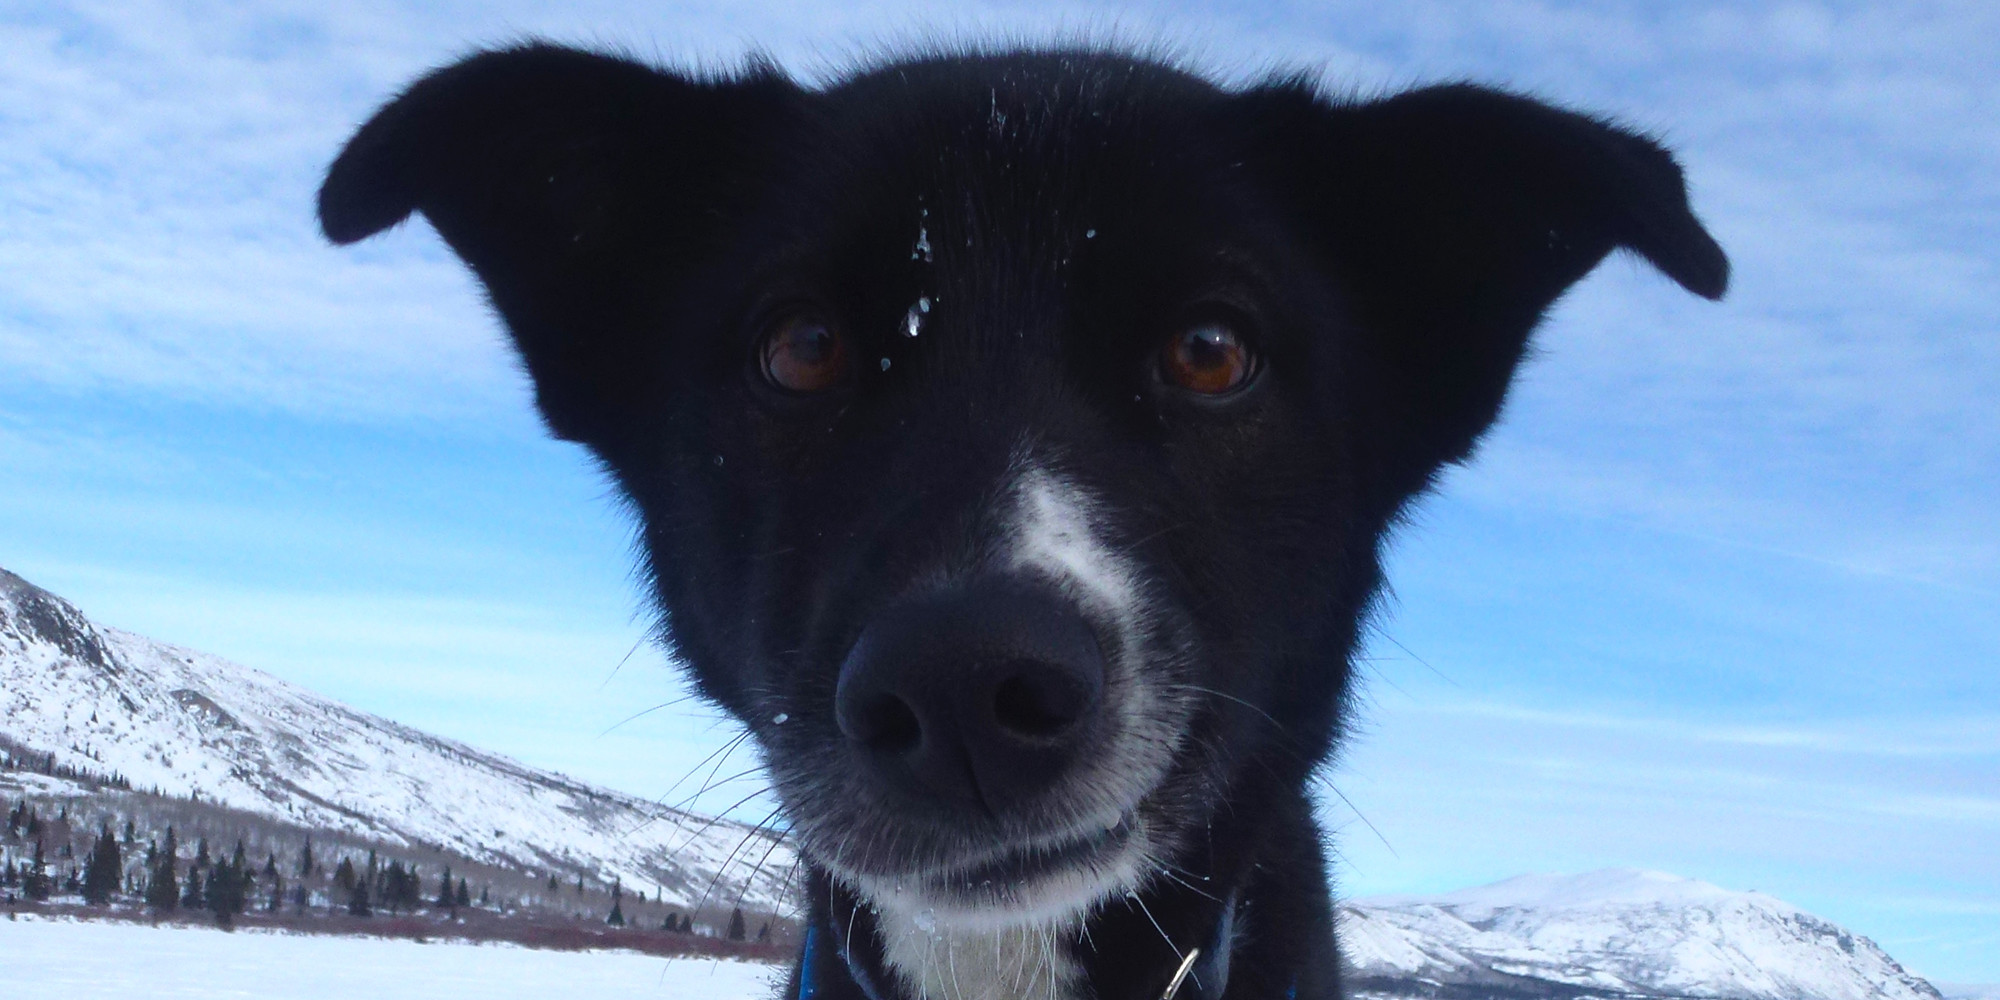 Into the Wild Adventures, dog sledding tours and winter adventures in the Yukon Territory, Canada - Mushing 101